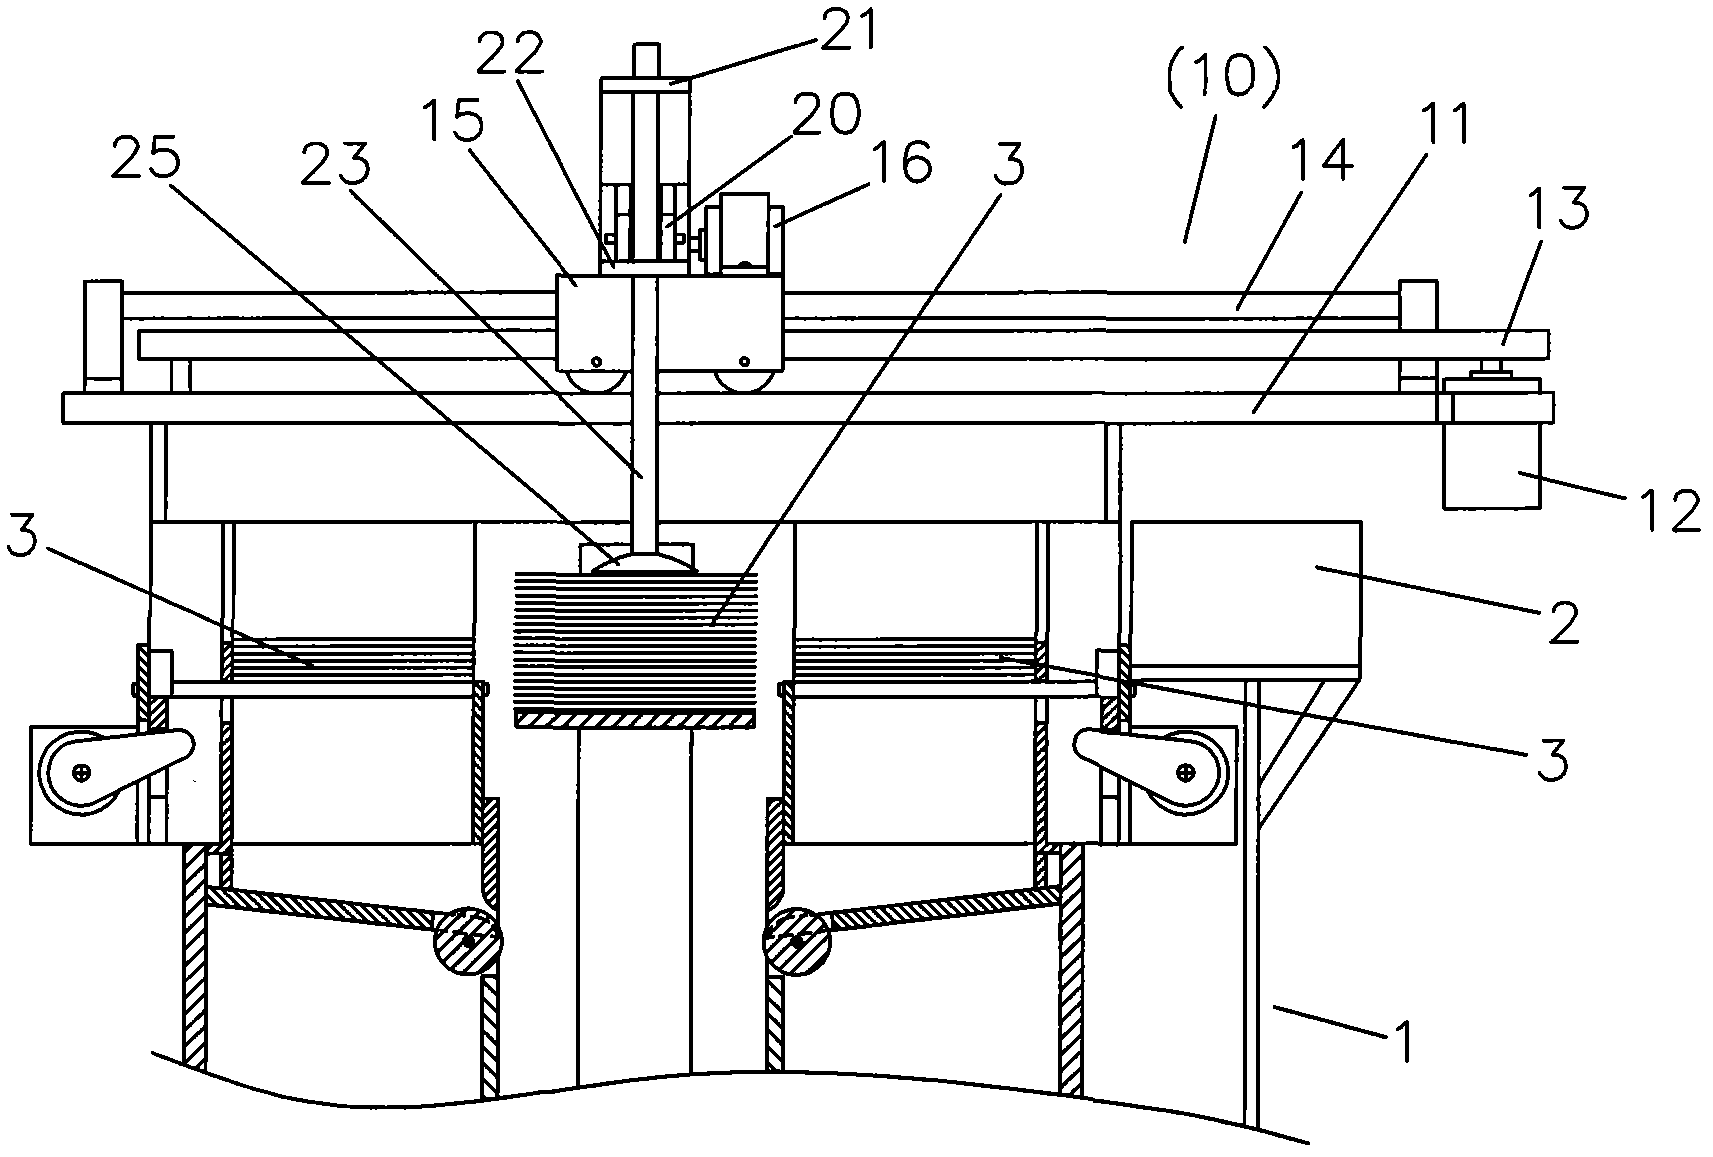 Device for dealing and displaying playing cards